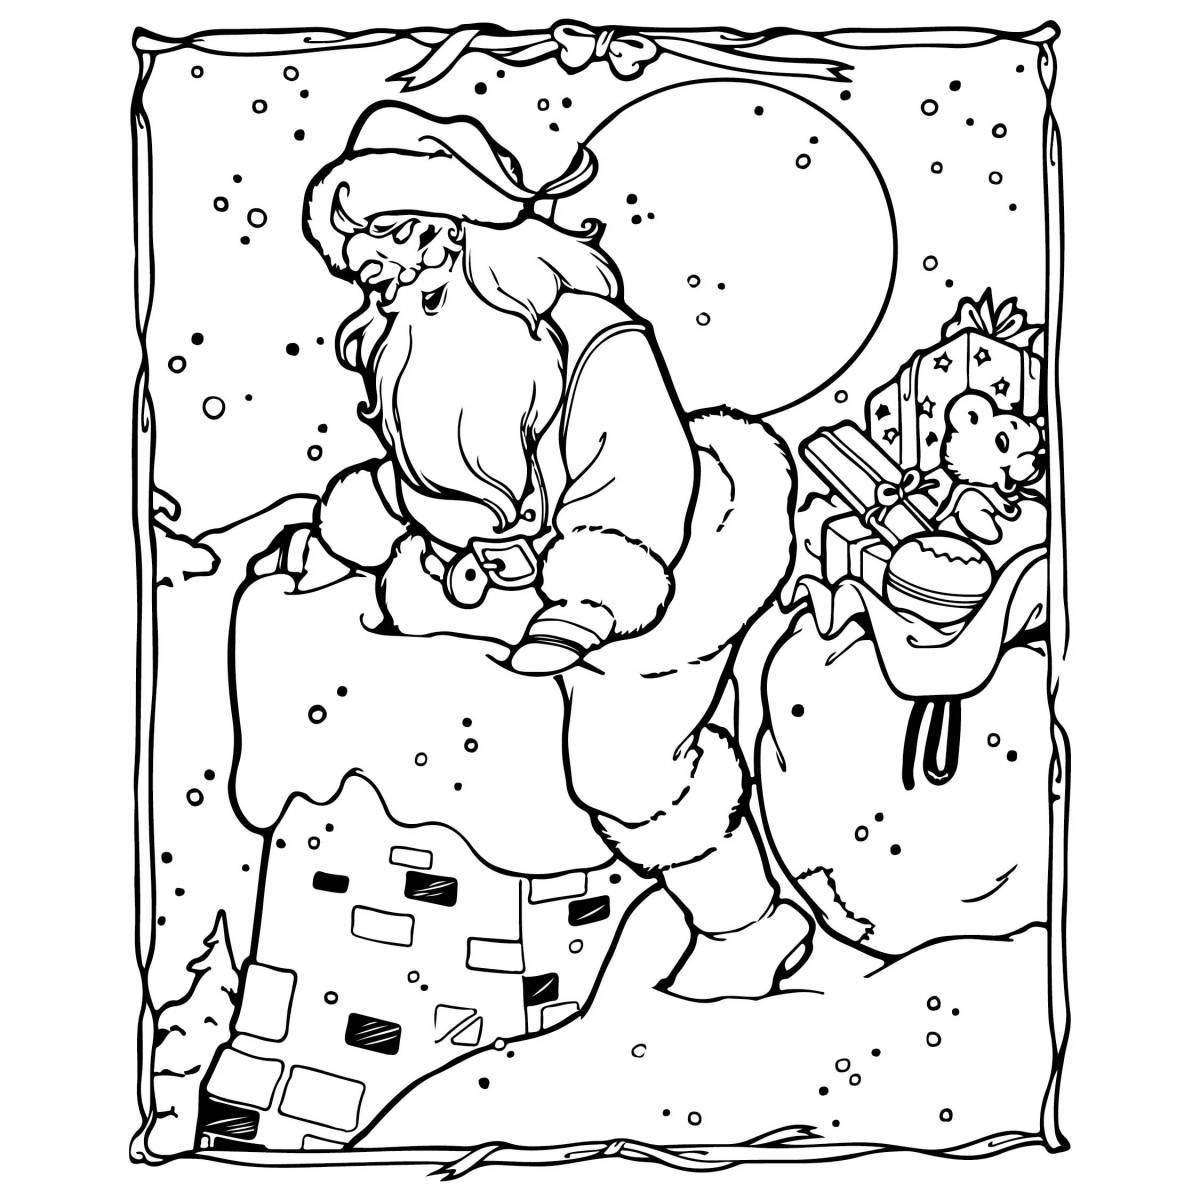 Exciting Christmas Eve coloring book